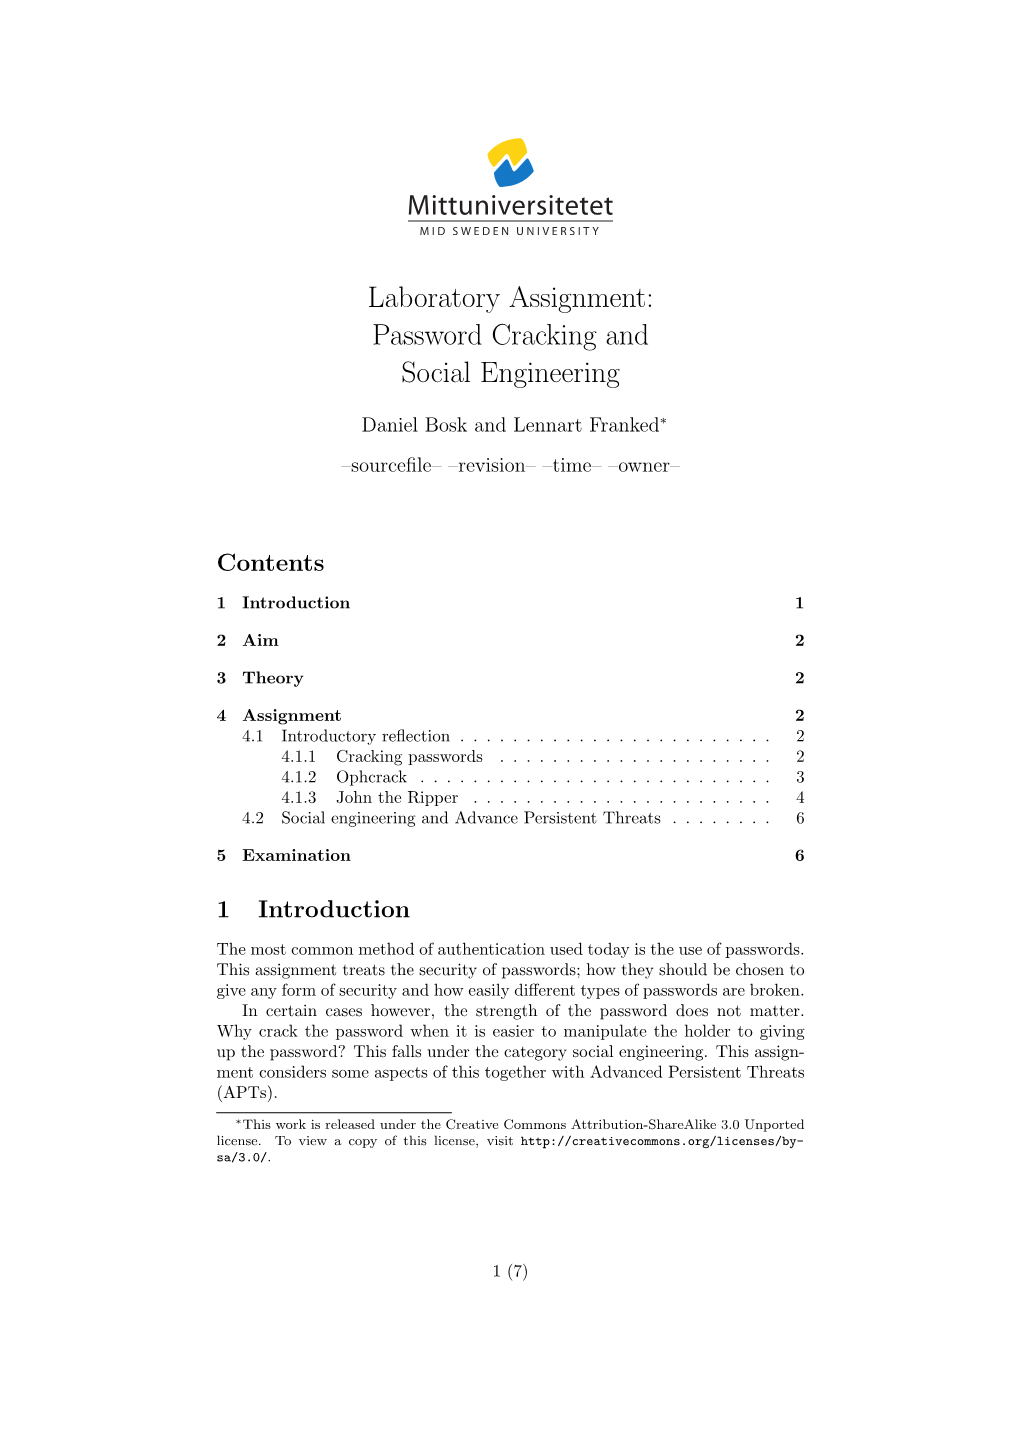 Laboratory Assignment: Password Cracking and Social Engineering